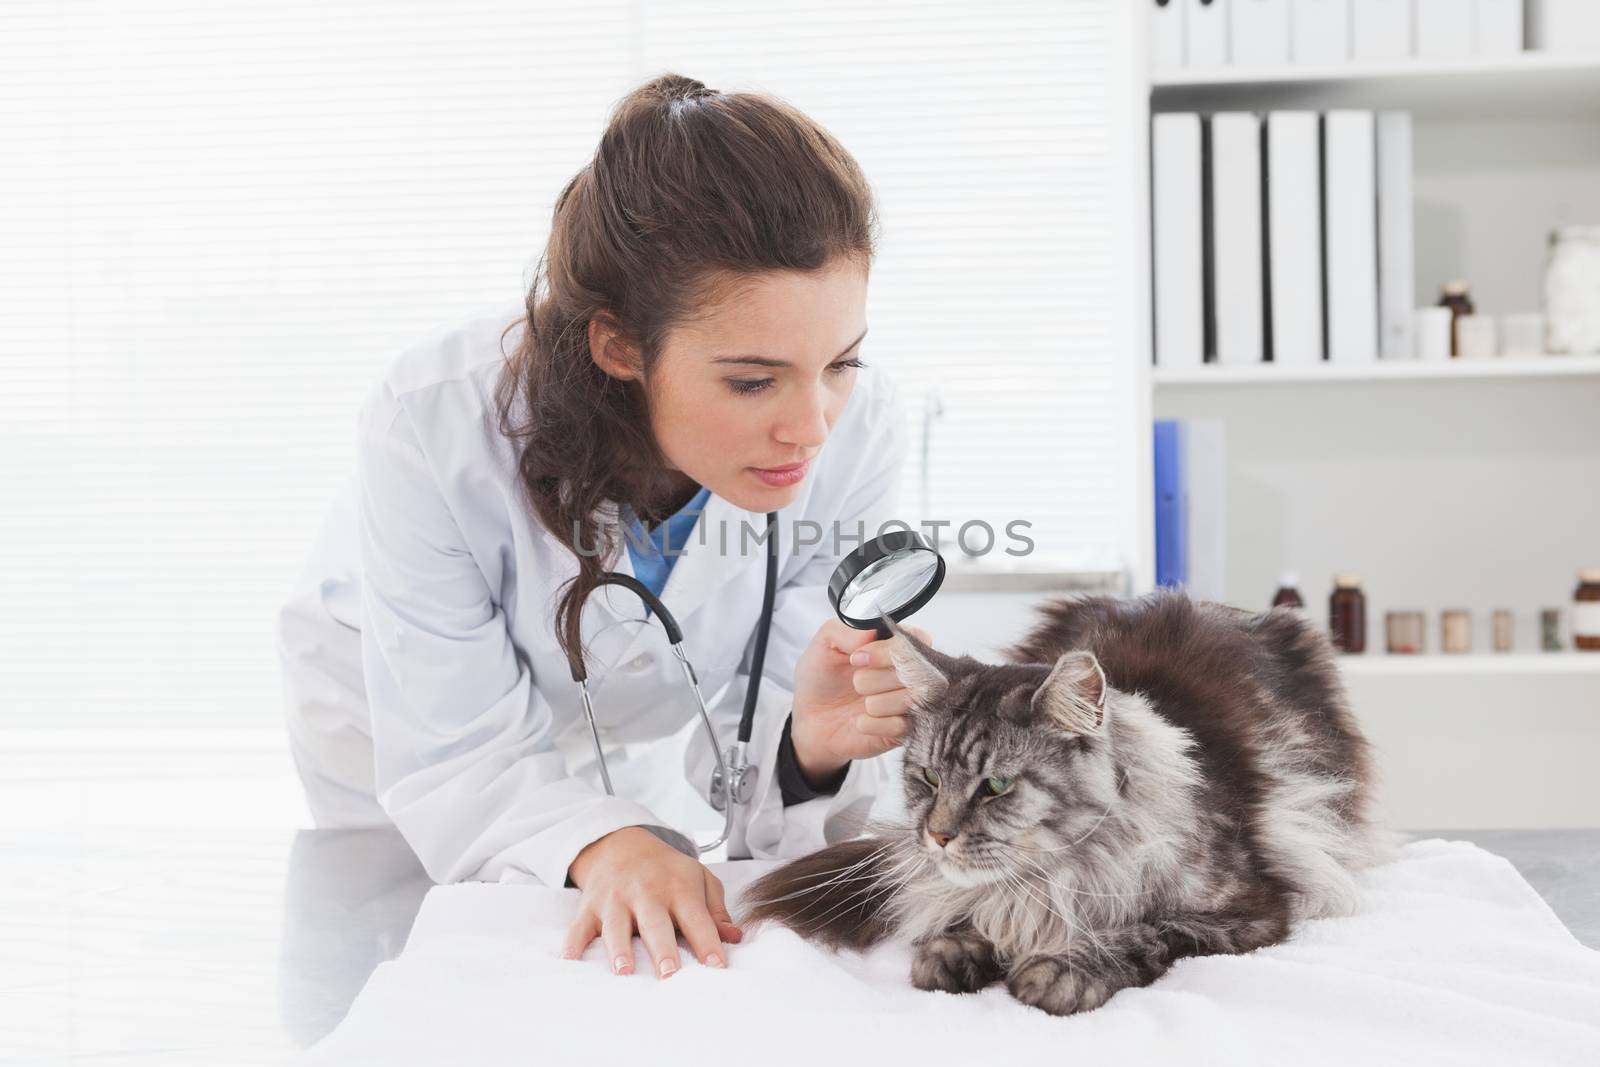 Vet examining a cat with magnifying glass in medical office